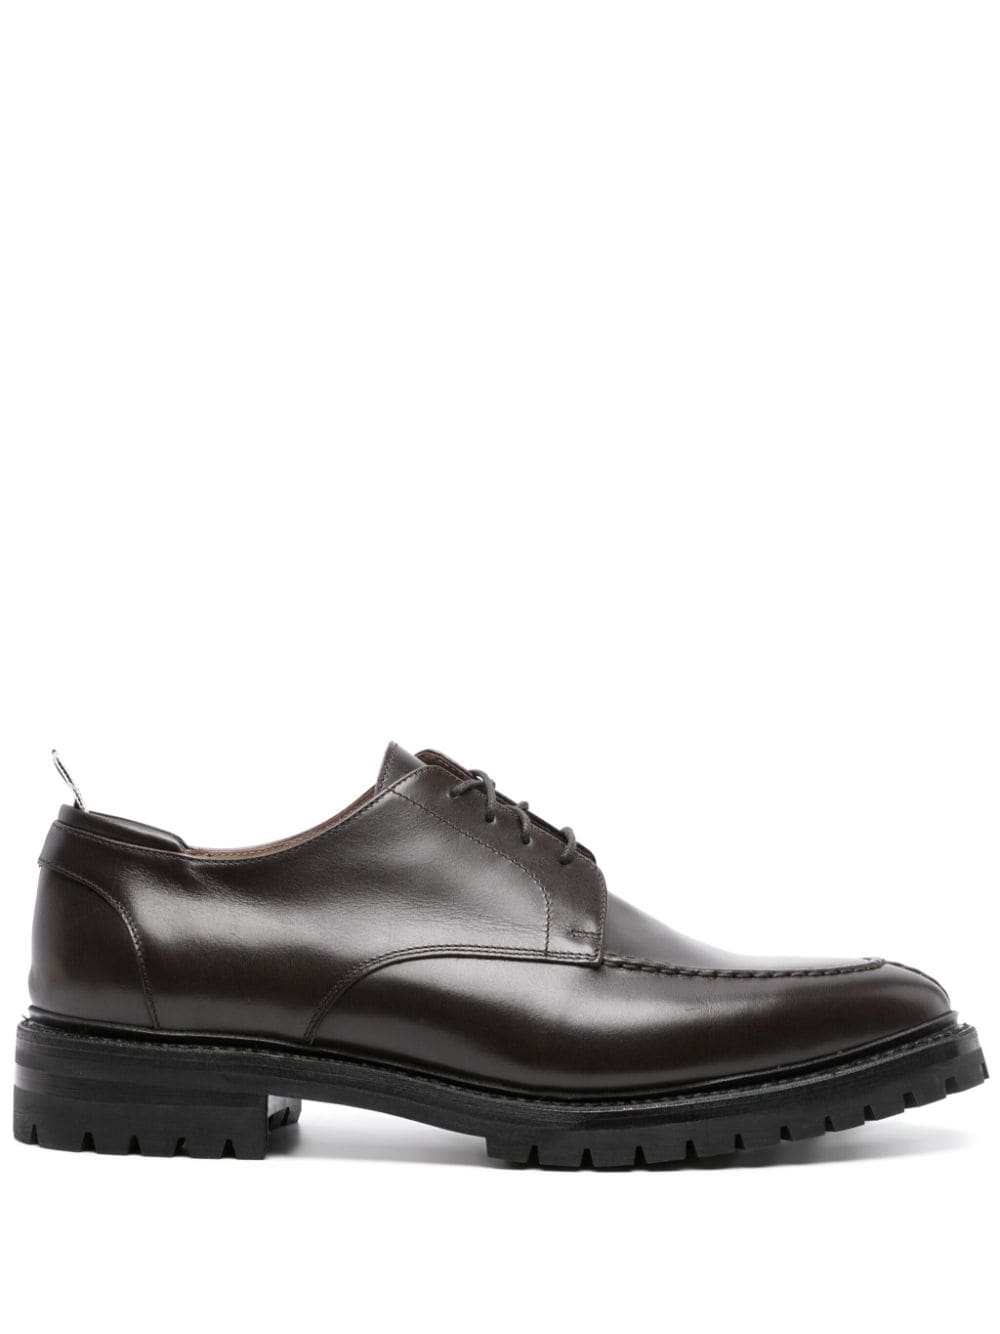 Thom Browne Leather Derby Shoes In Brown